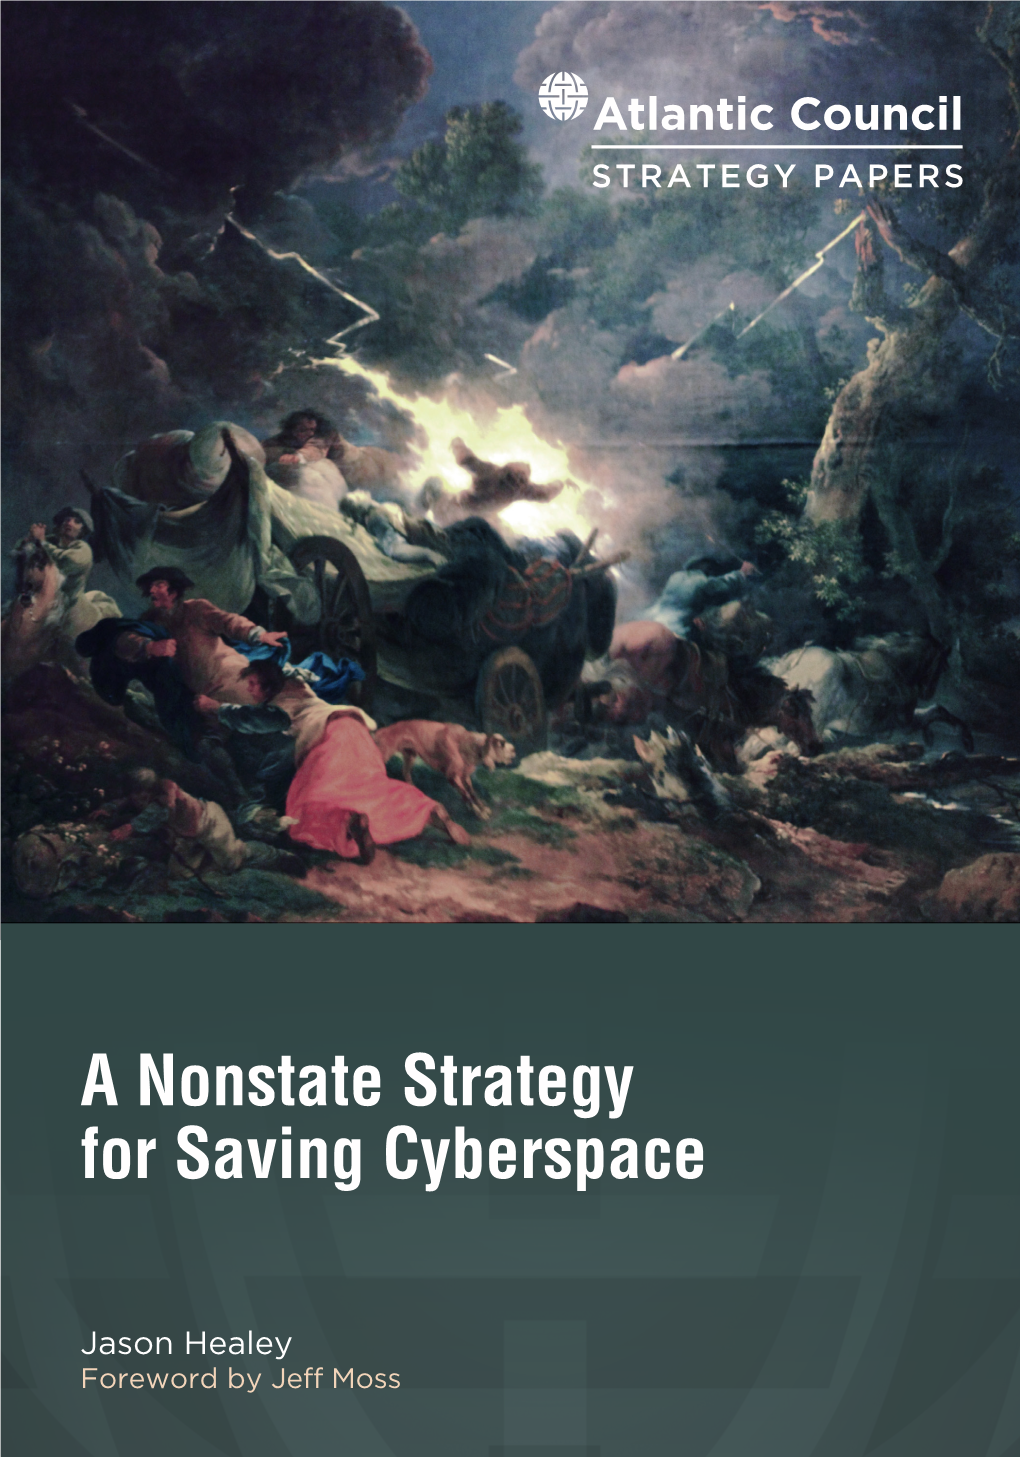 A Nonstate Strategy for Saving Cyberspace